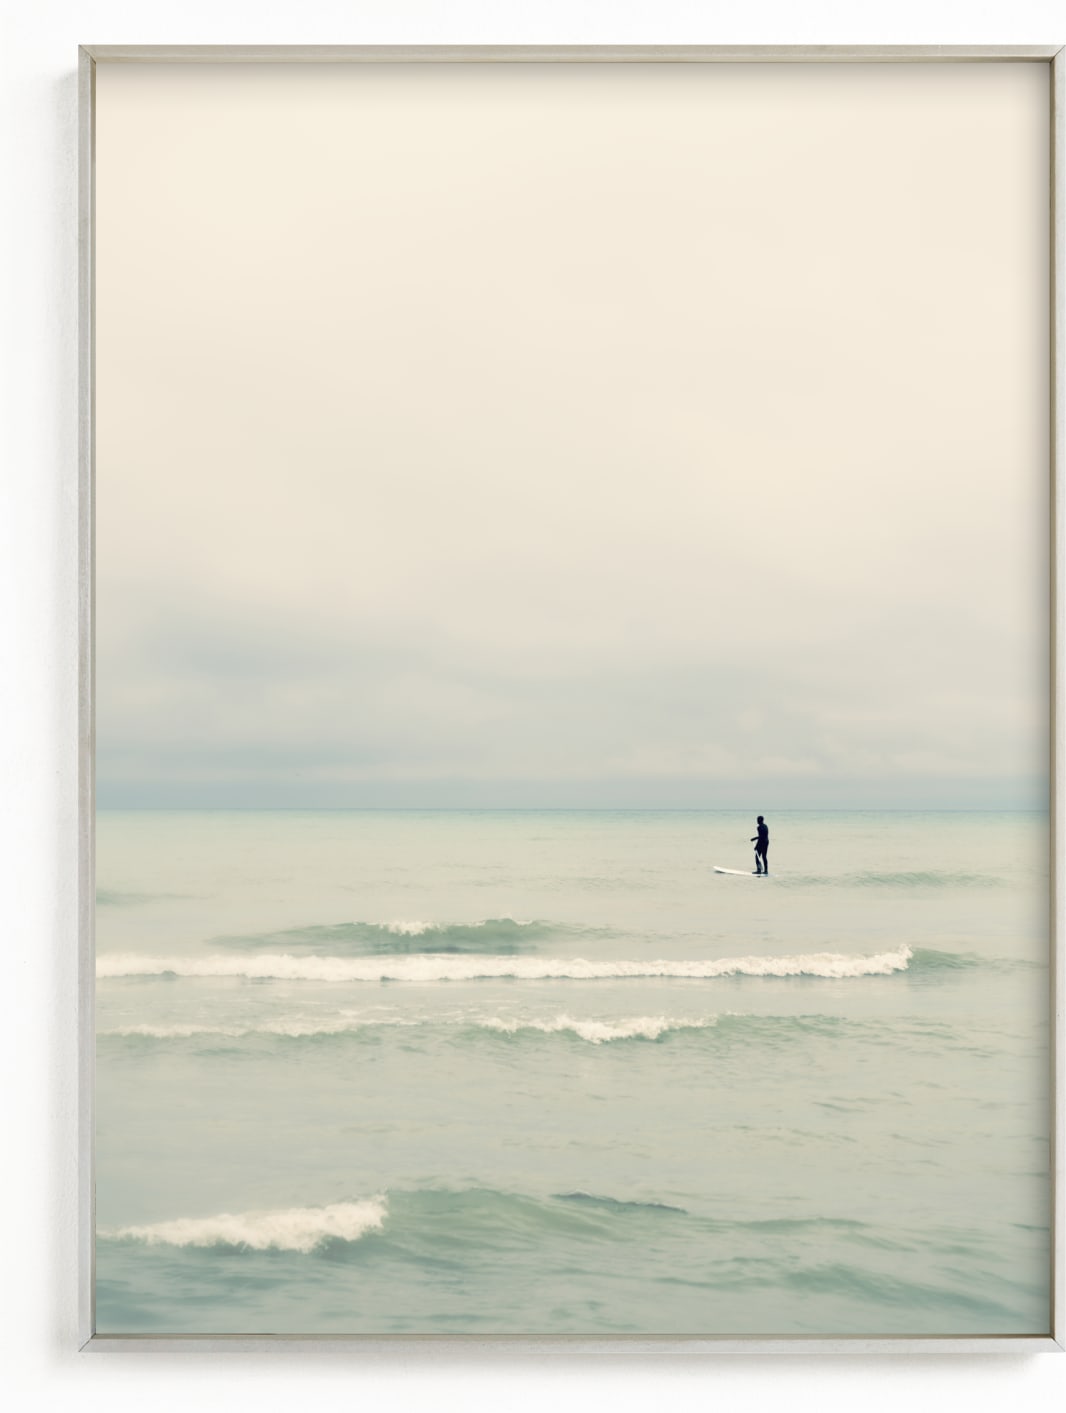 This is a blue art by Jacquelyn Sloane Siklos called Paddleboard Solitude.